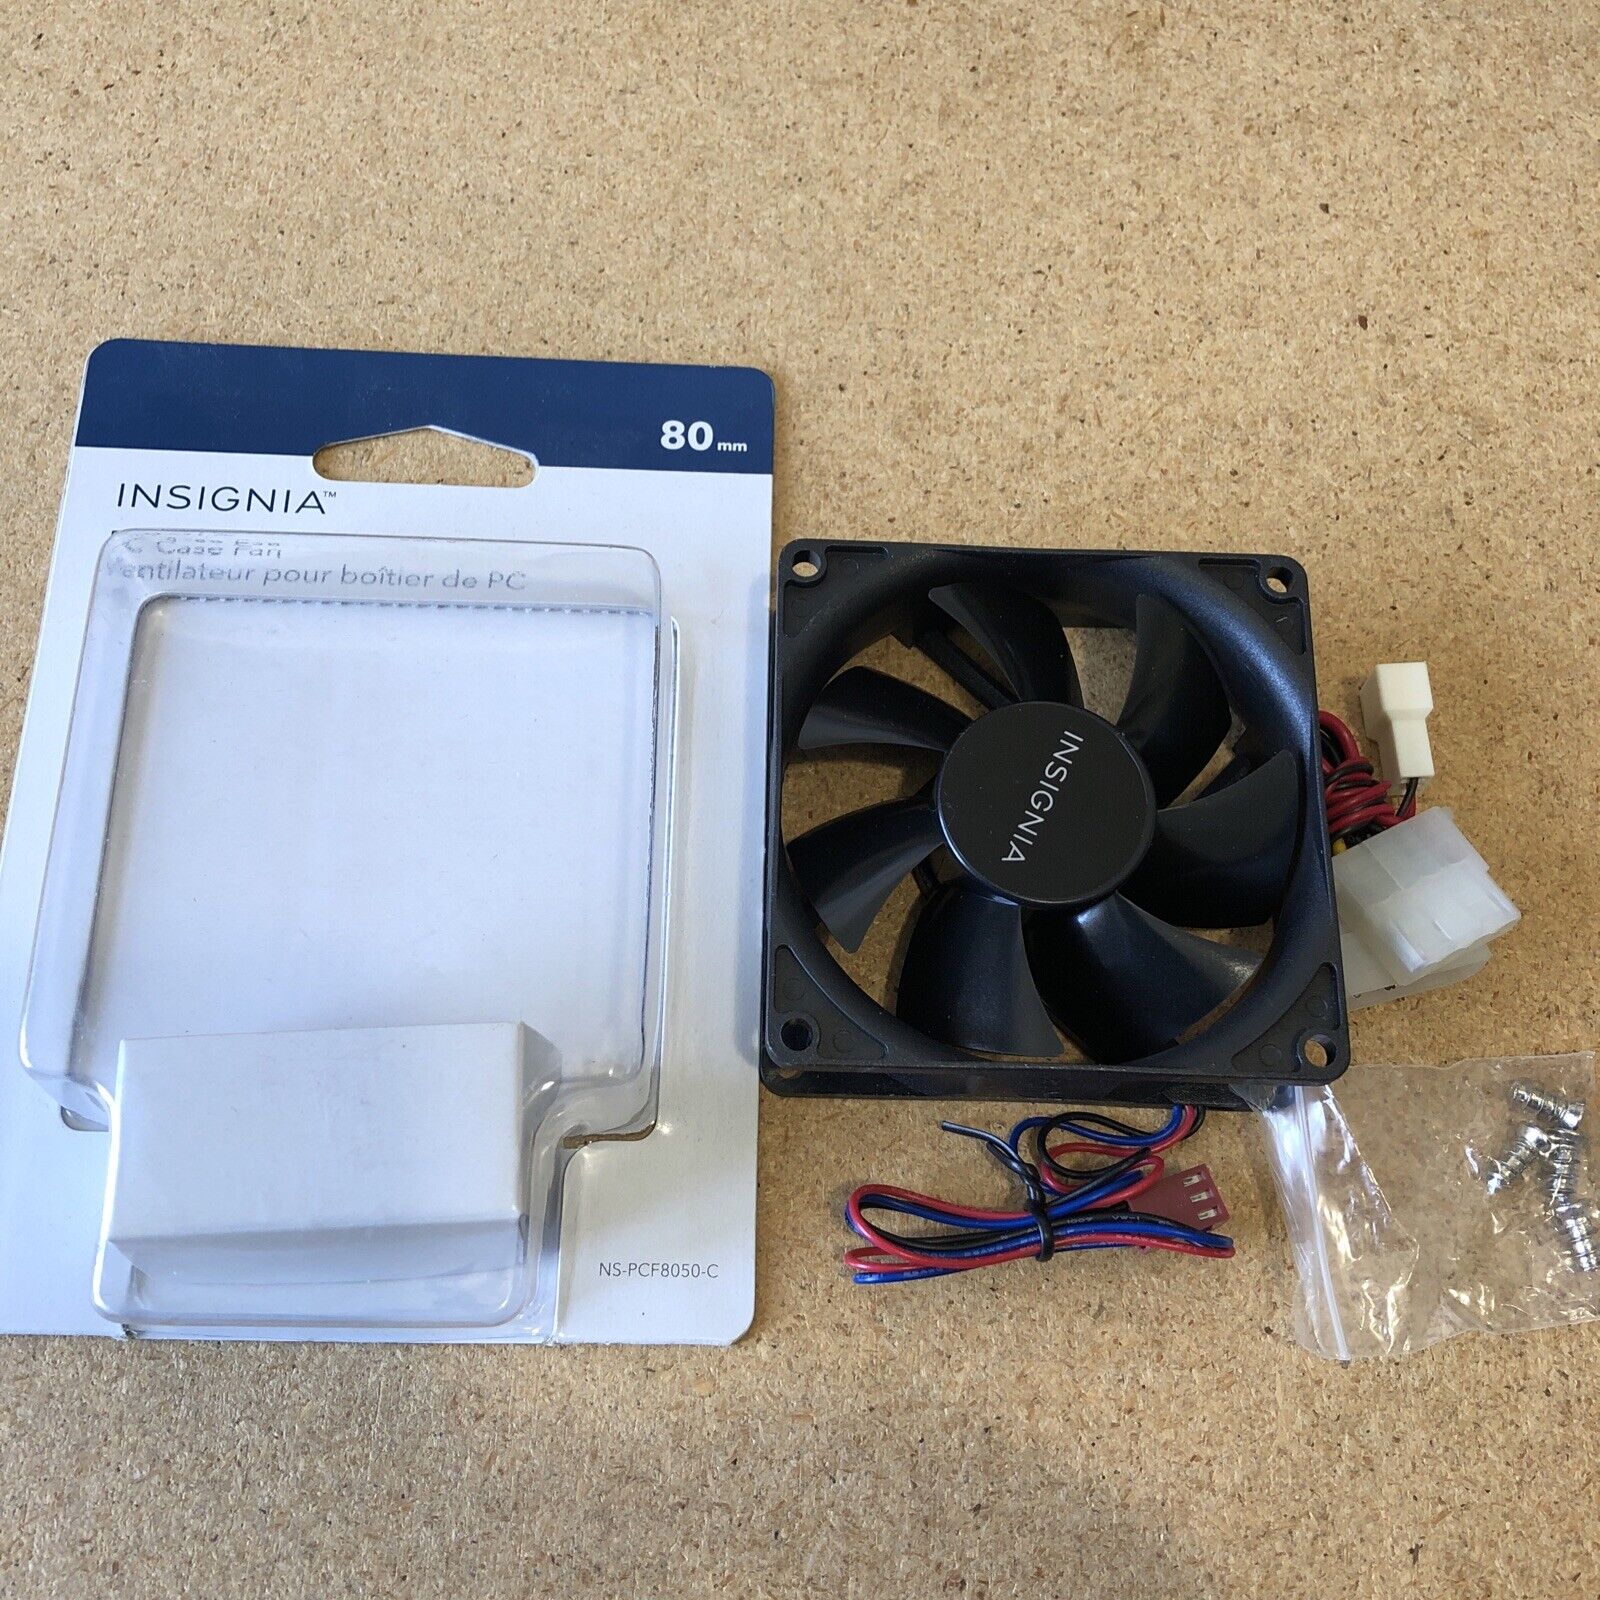 Insignia 80mm PC Cooling Fan Computer Case ATX Tower Quiet 3pin / 4pin 12V 